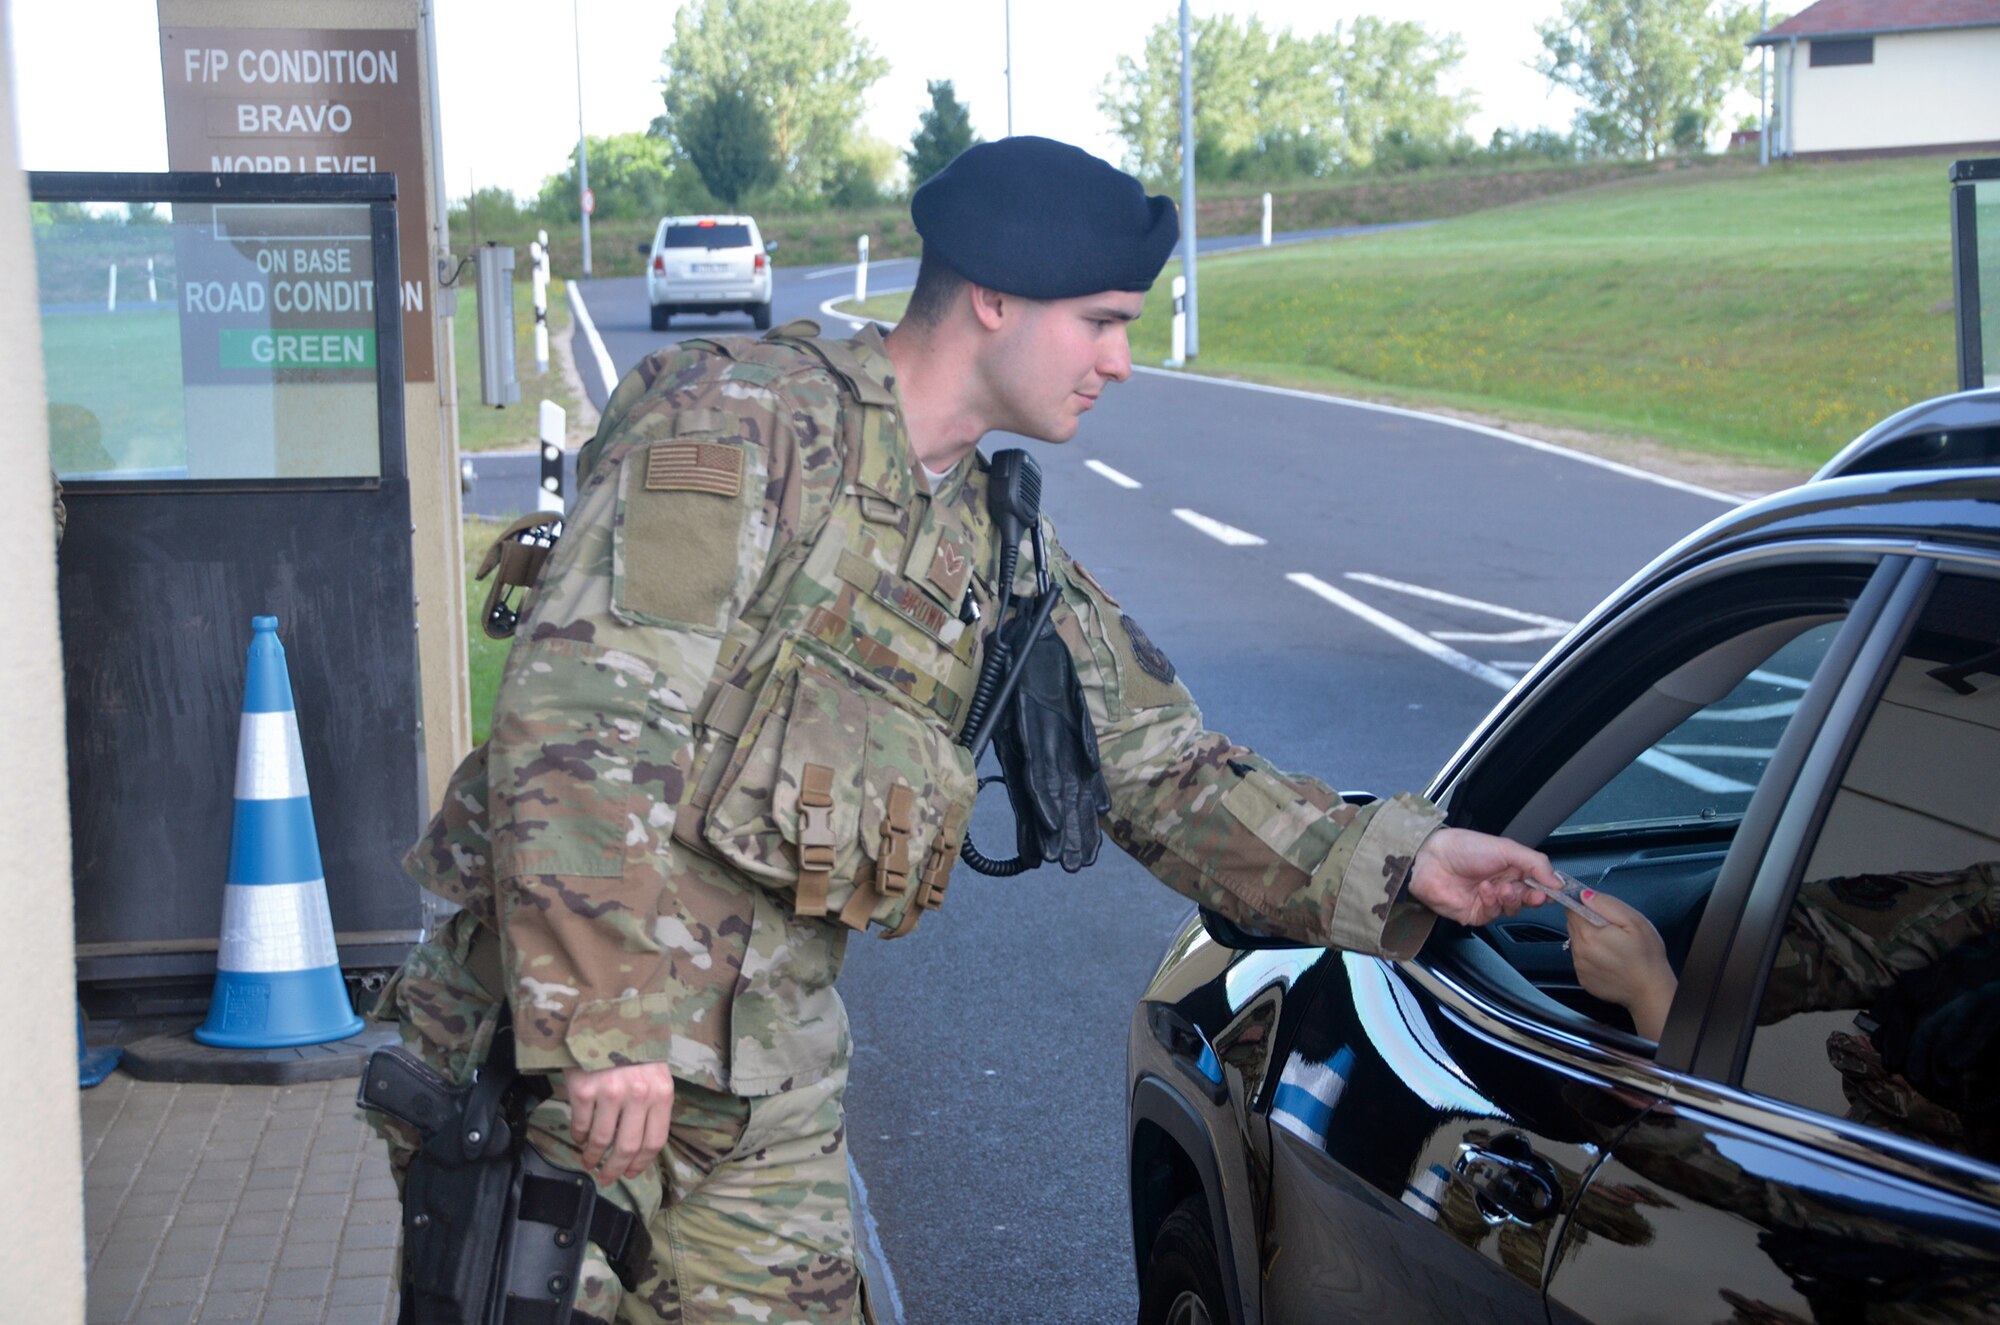 Senior Airman Jackson Brown, 445th Security Forces Squadron, performs installation security June 21, 2019, at Spangdahlem Air Base, Germany. An important function of SF personnel is to protect the integrity of Air Force bases and installation assets.